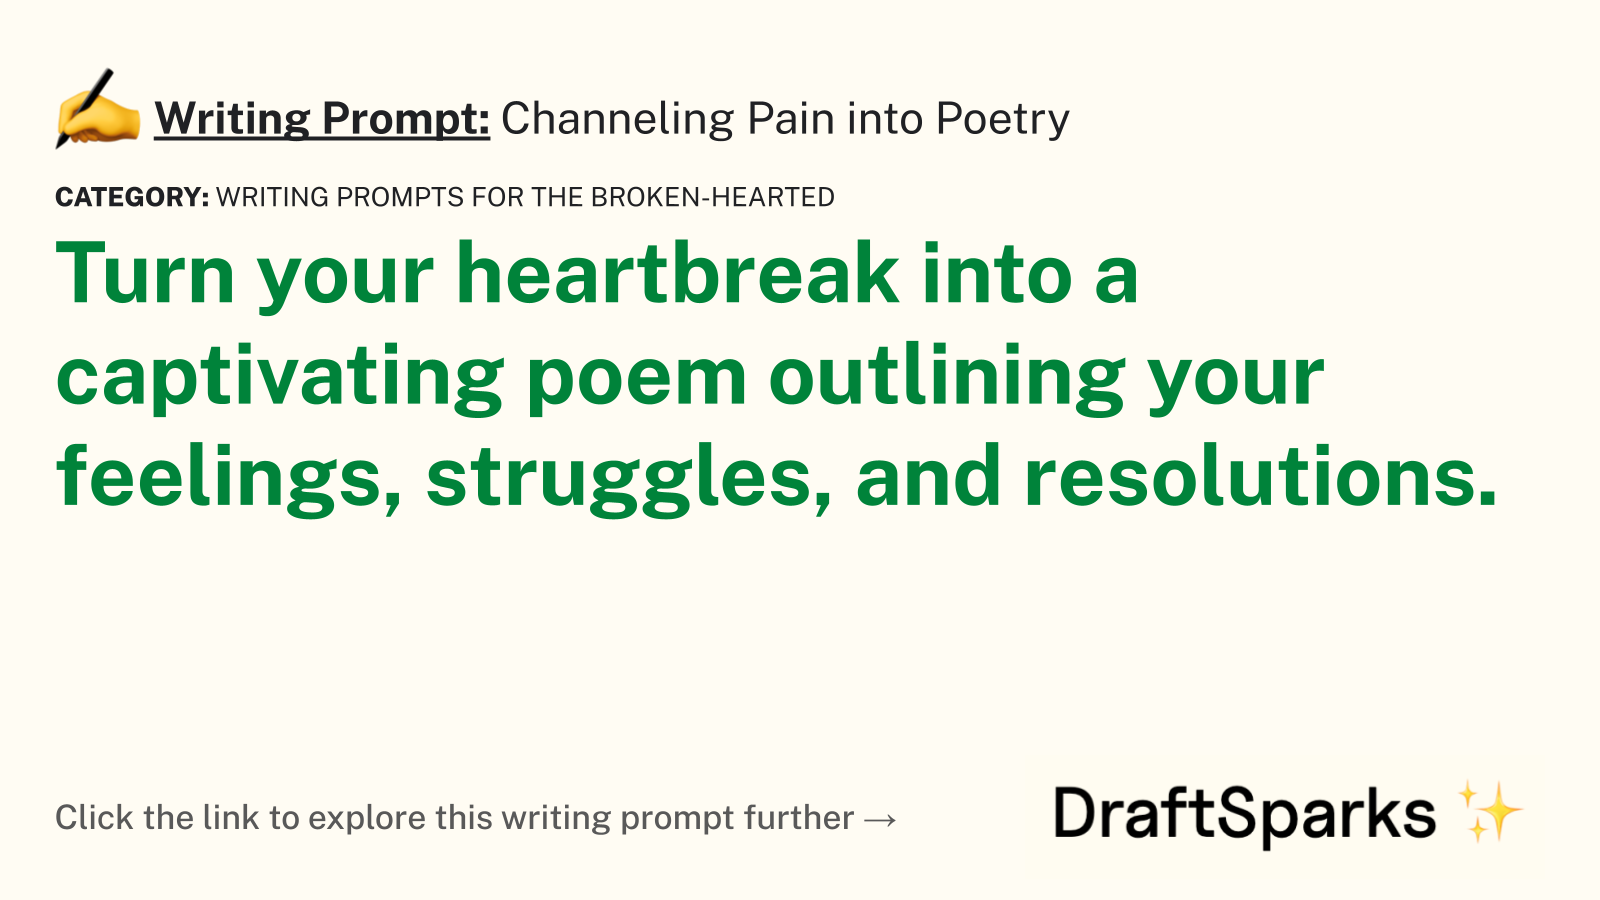 Channeling Pain into Poetry